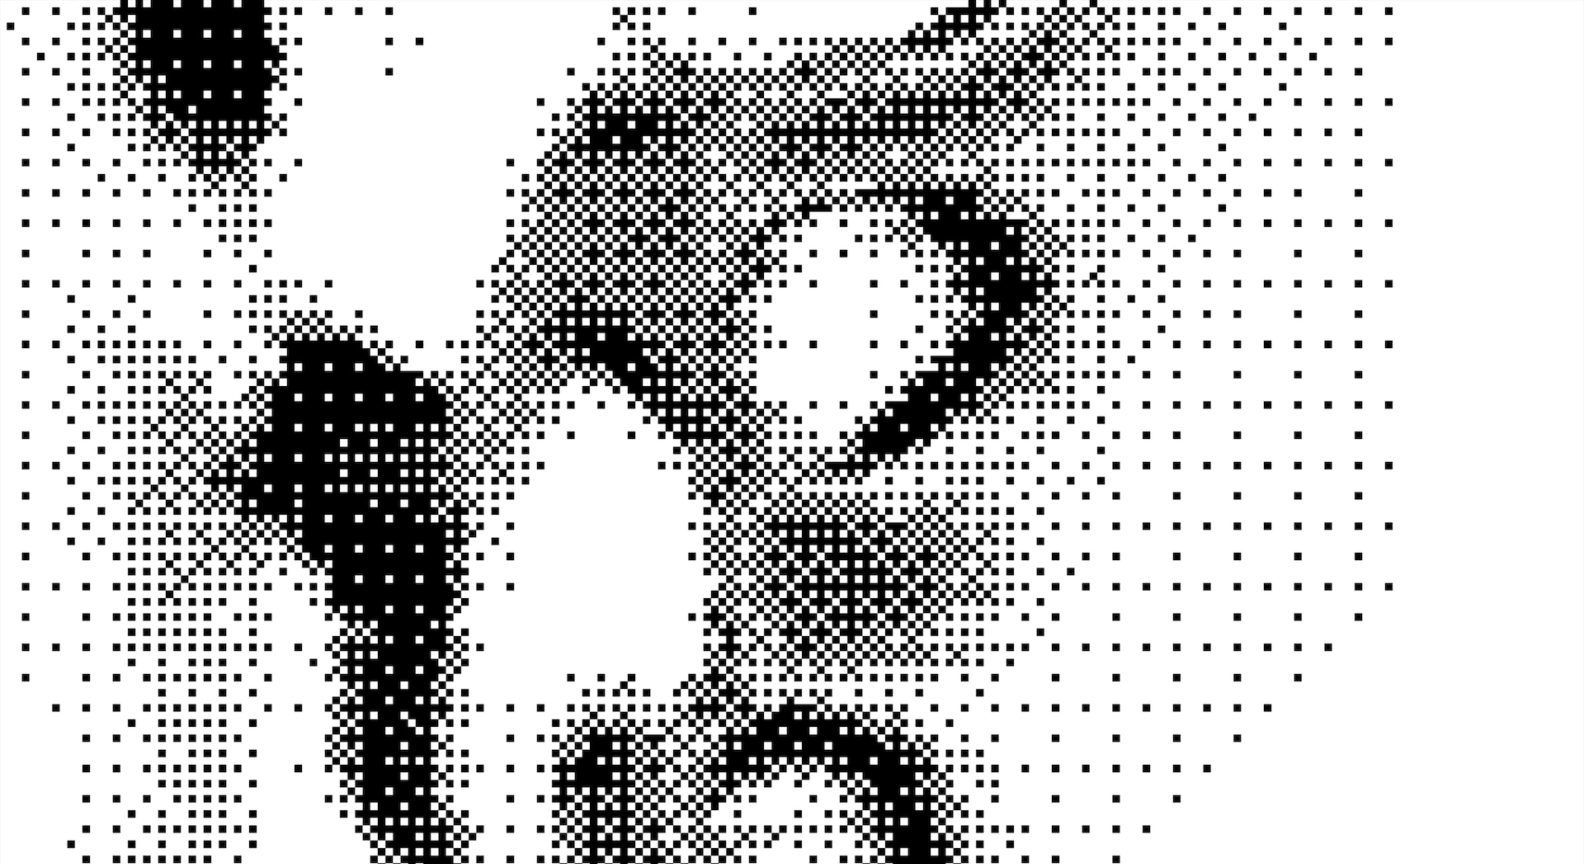 Closeup of a abstract black and white pixel pattern